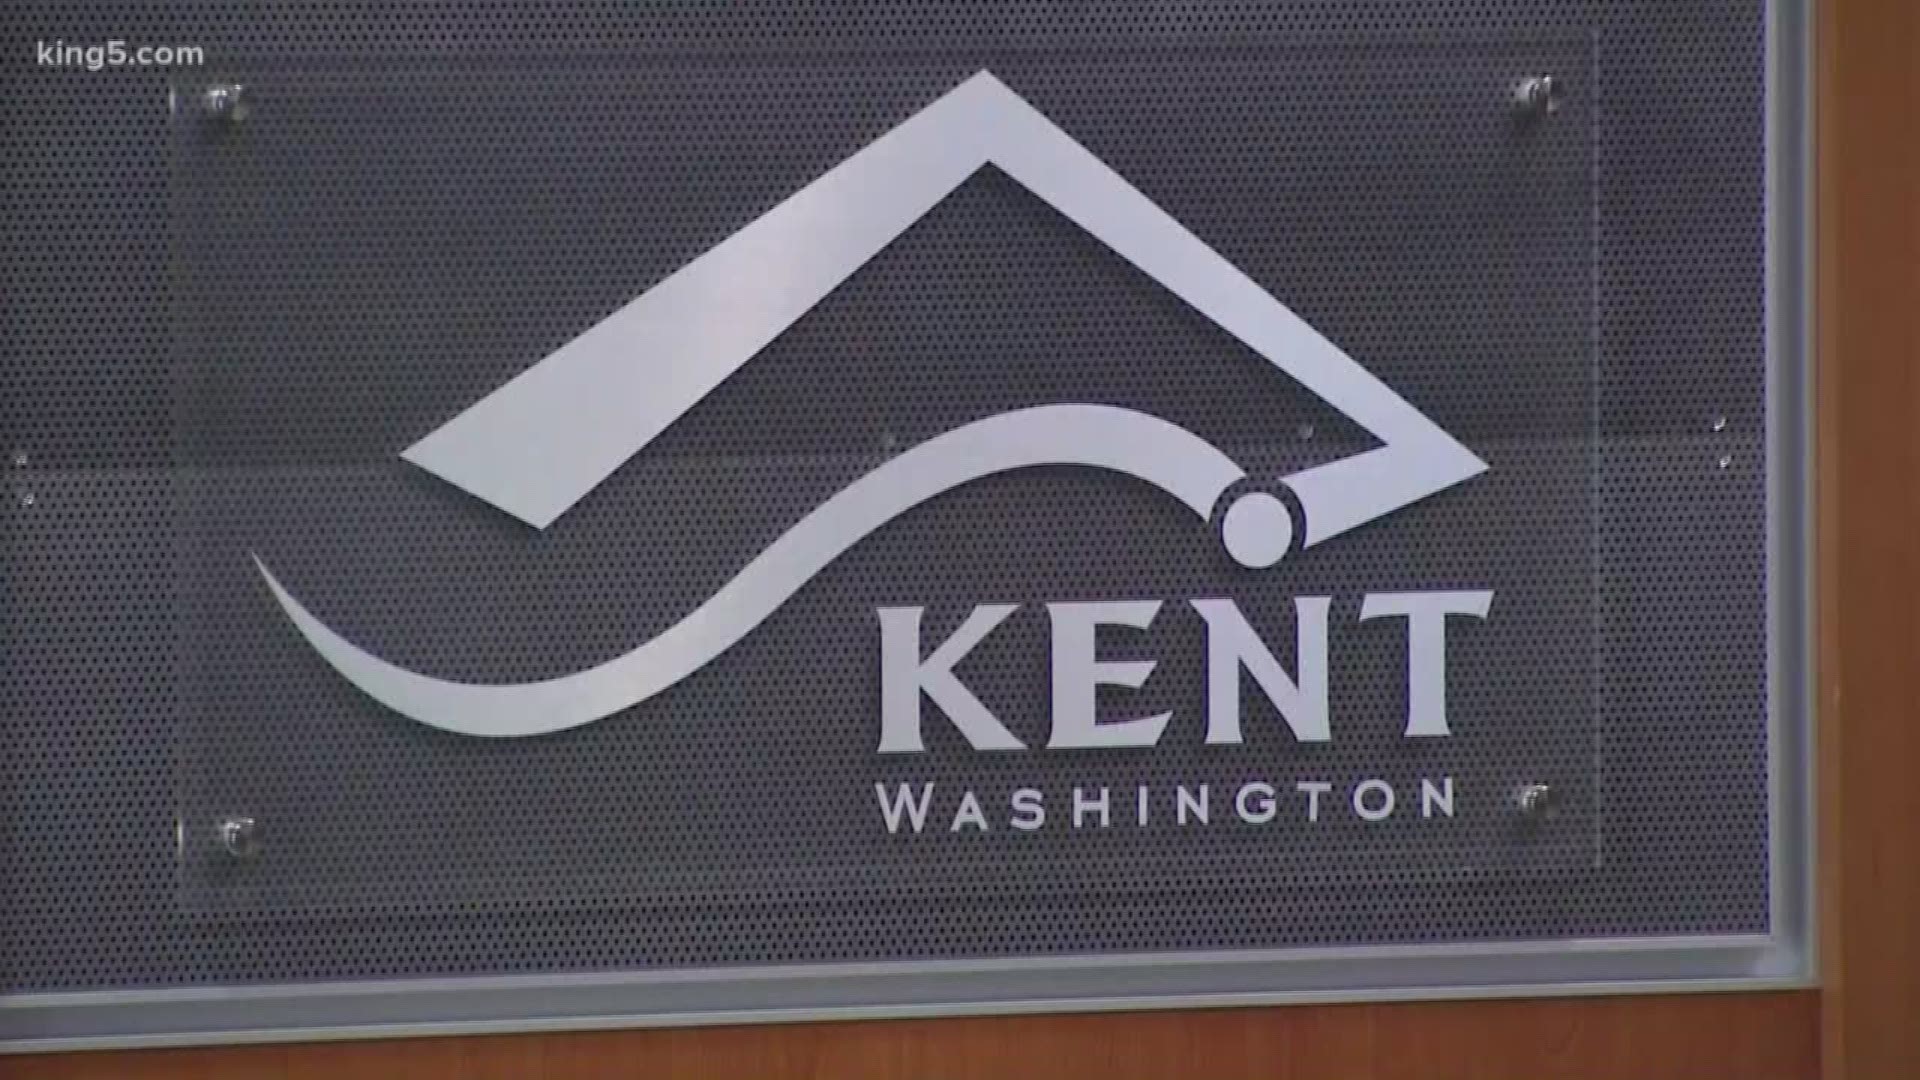 People who test positive will be moved to motel in Kent, but city leaders say right now there is no plan as to how that motel or the patients will be managed.